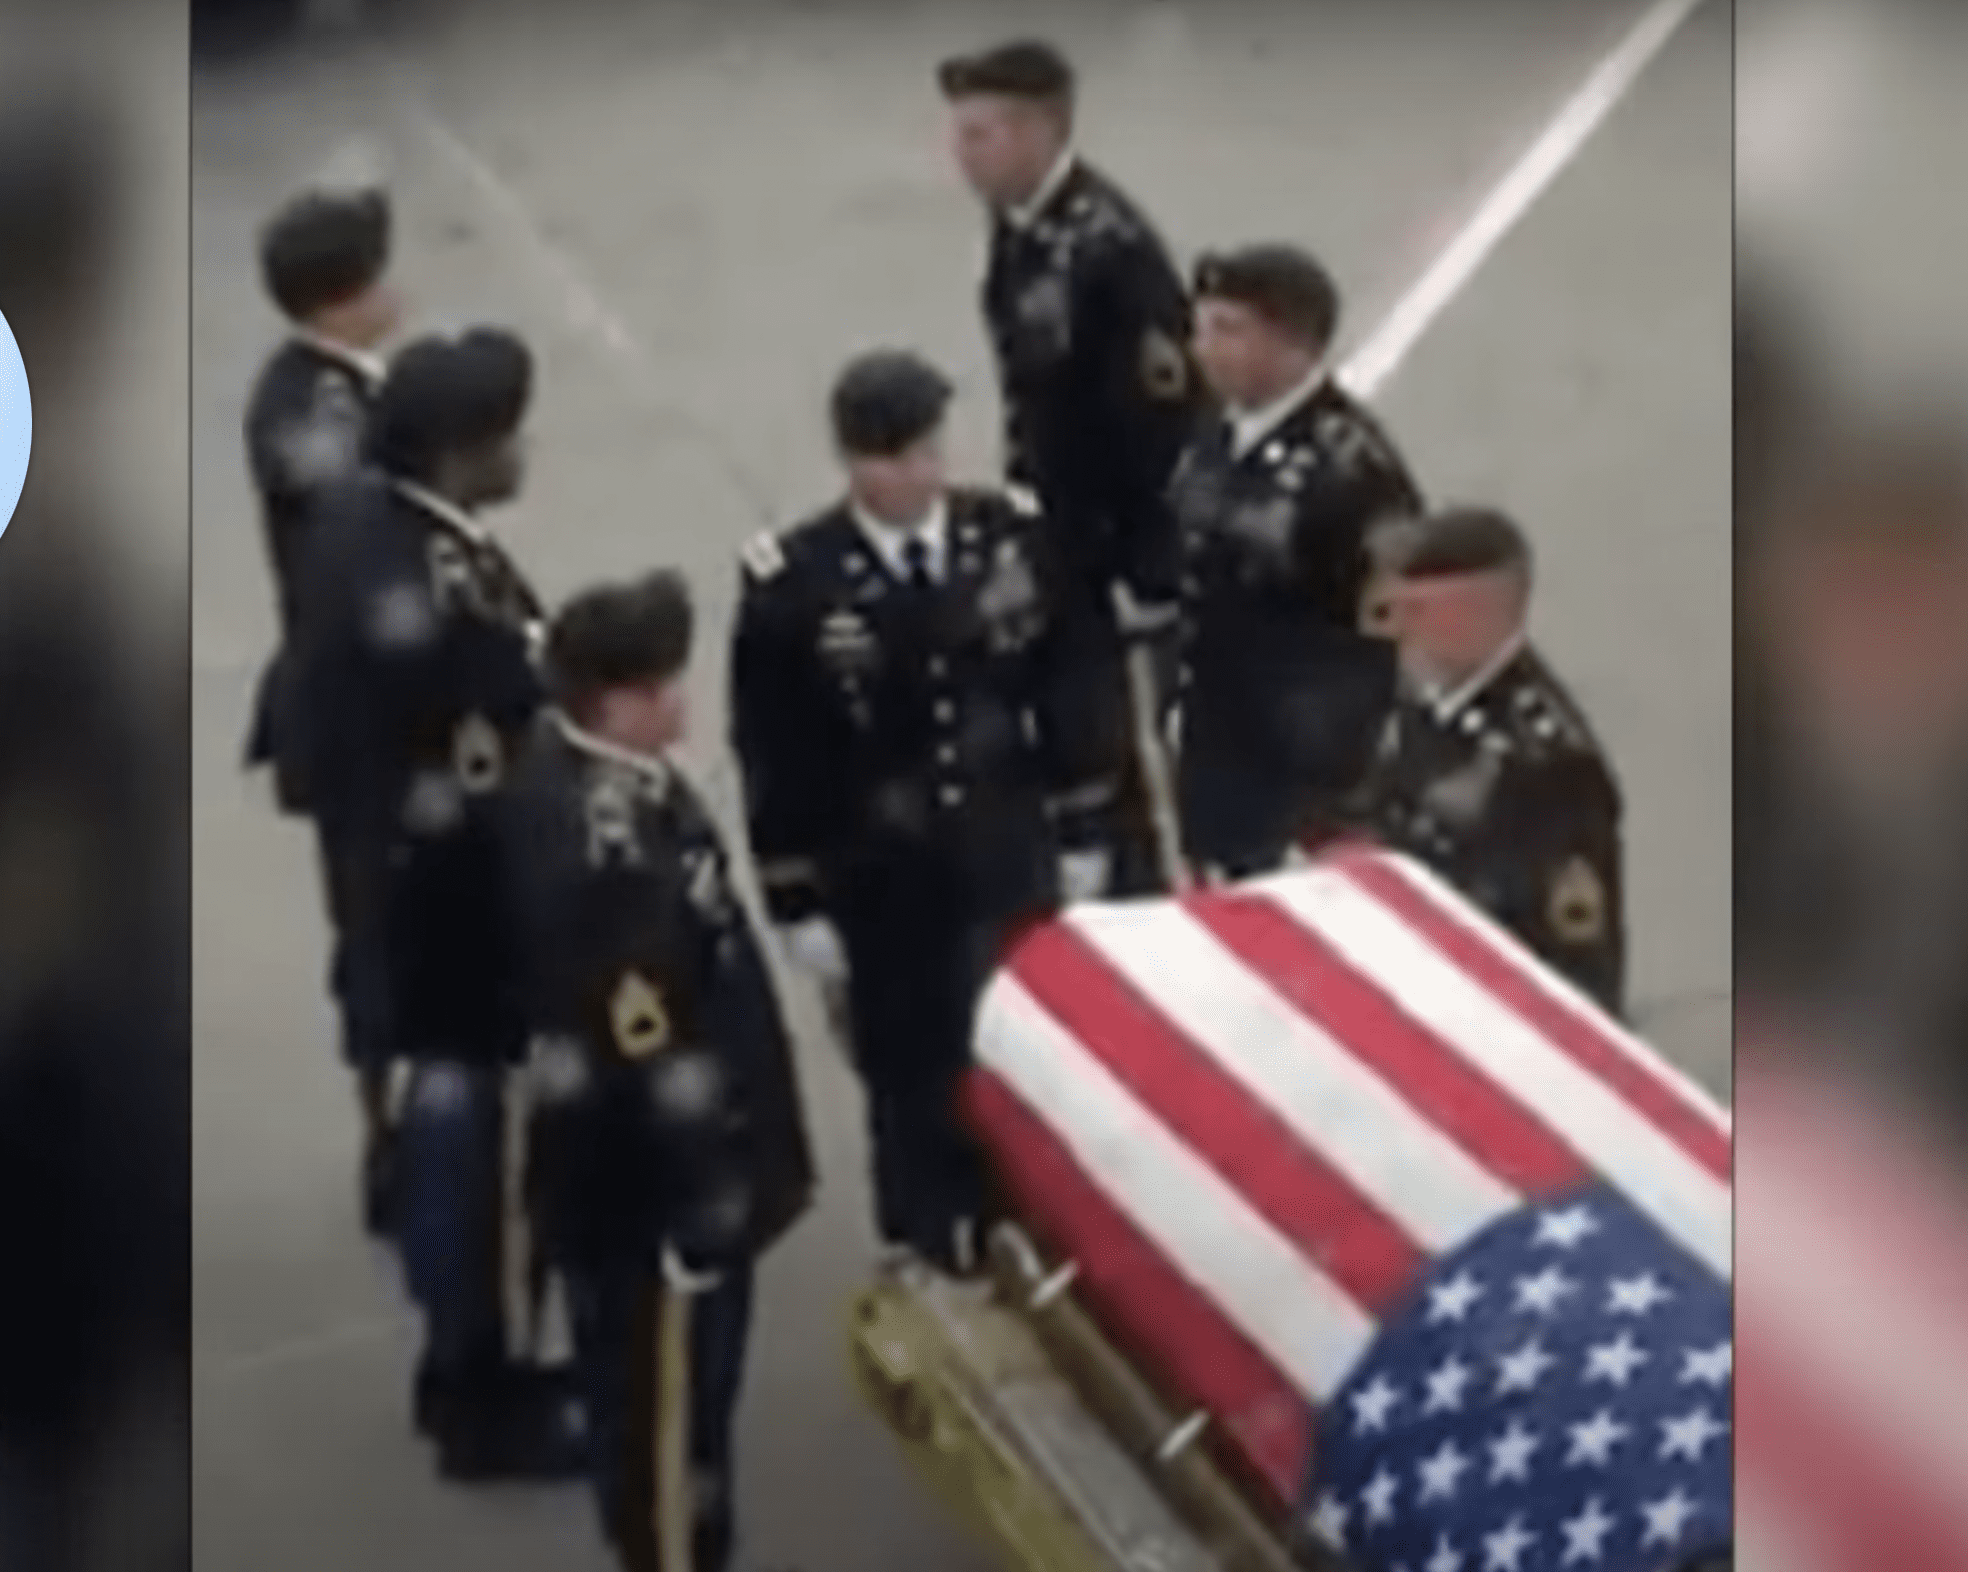 Soldiers are pictured standing next to the flag-draped coffin. | Source: YouTube.com/Inside Edition